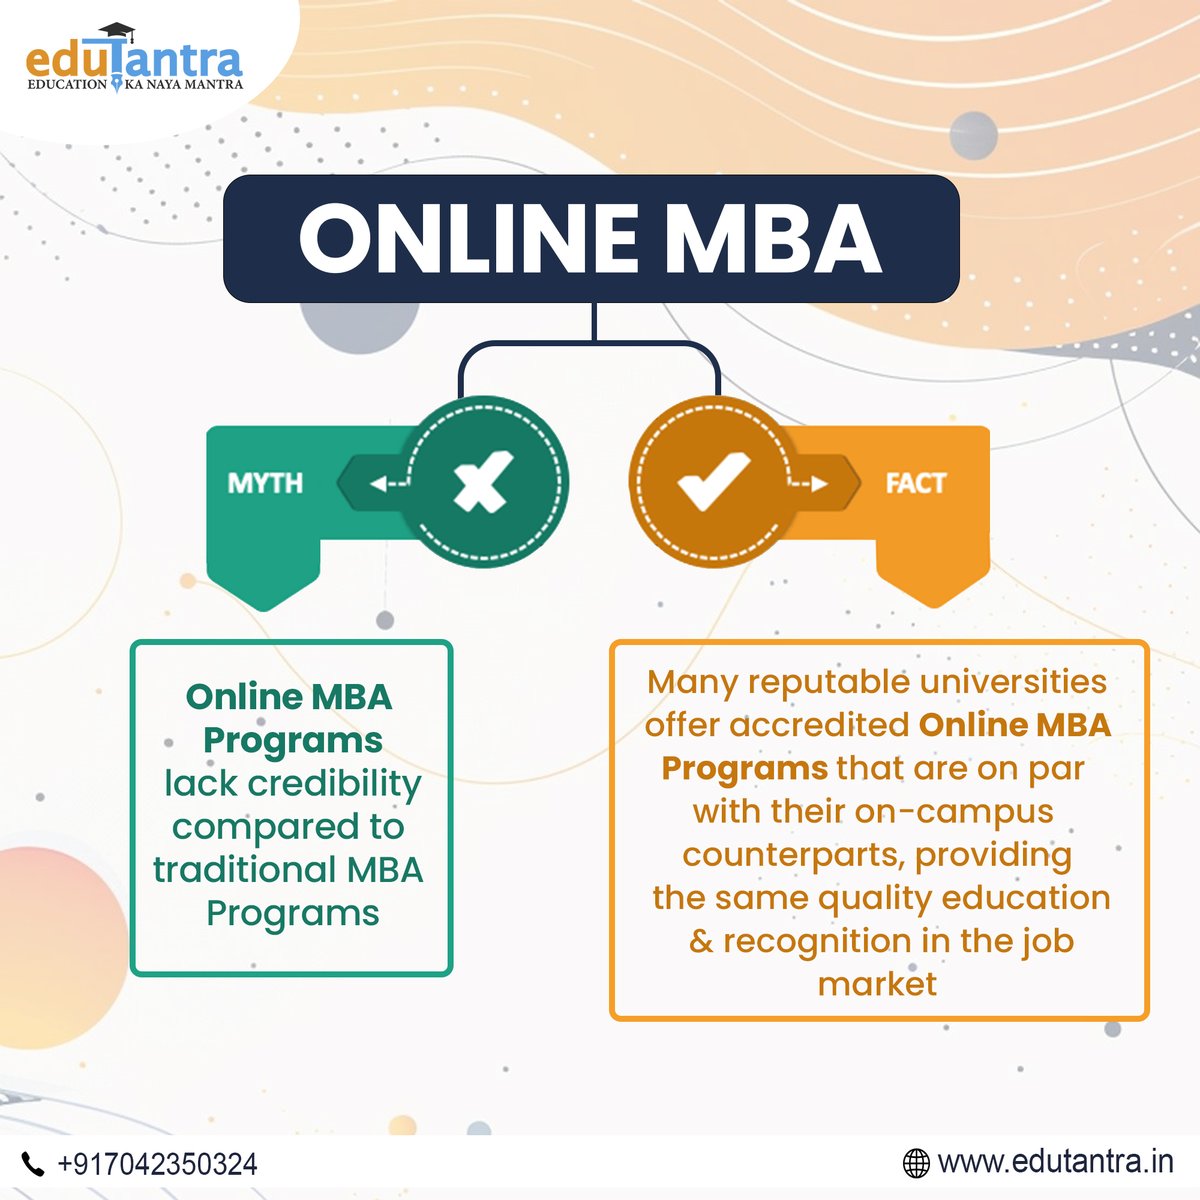 Let's burst the #myth with proper #fact about #OnlineMBA!!📷📷
.
Website link in Bio📷
.
#Edutantra #onlinecourses #distancelearning #DistanceCourses #onlinestudy #elearning #eLearningCourses #OnlineUniversity #myths #factsyoudidntknow #factpost